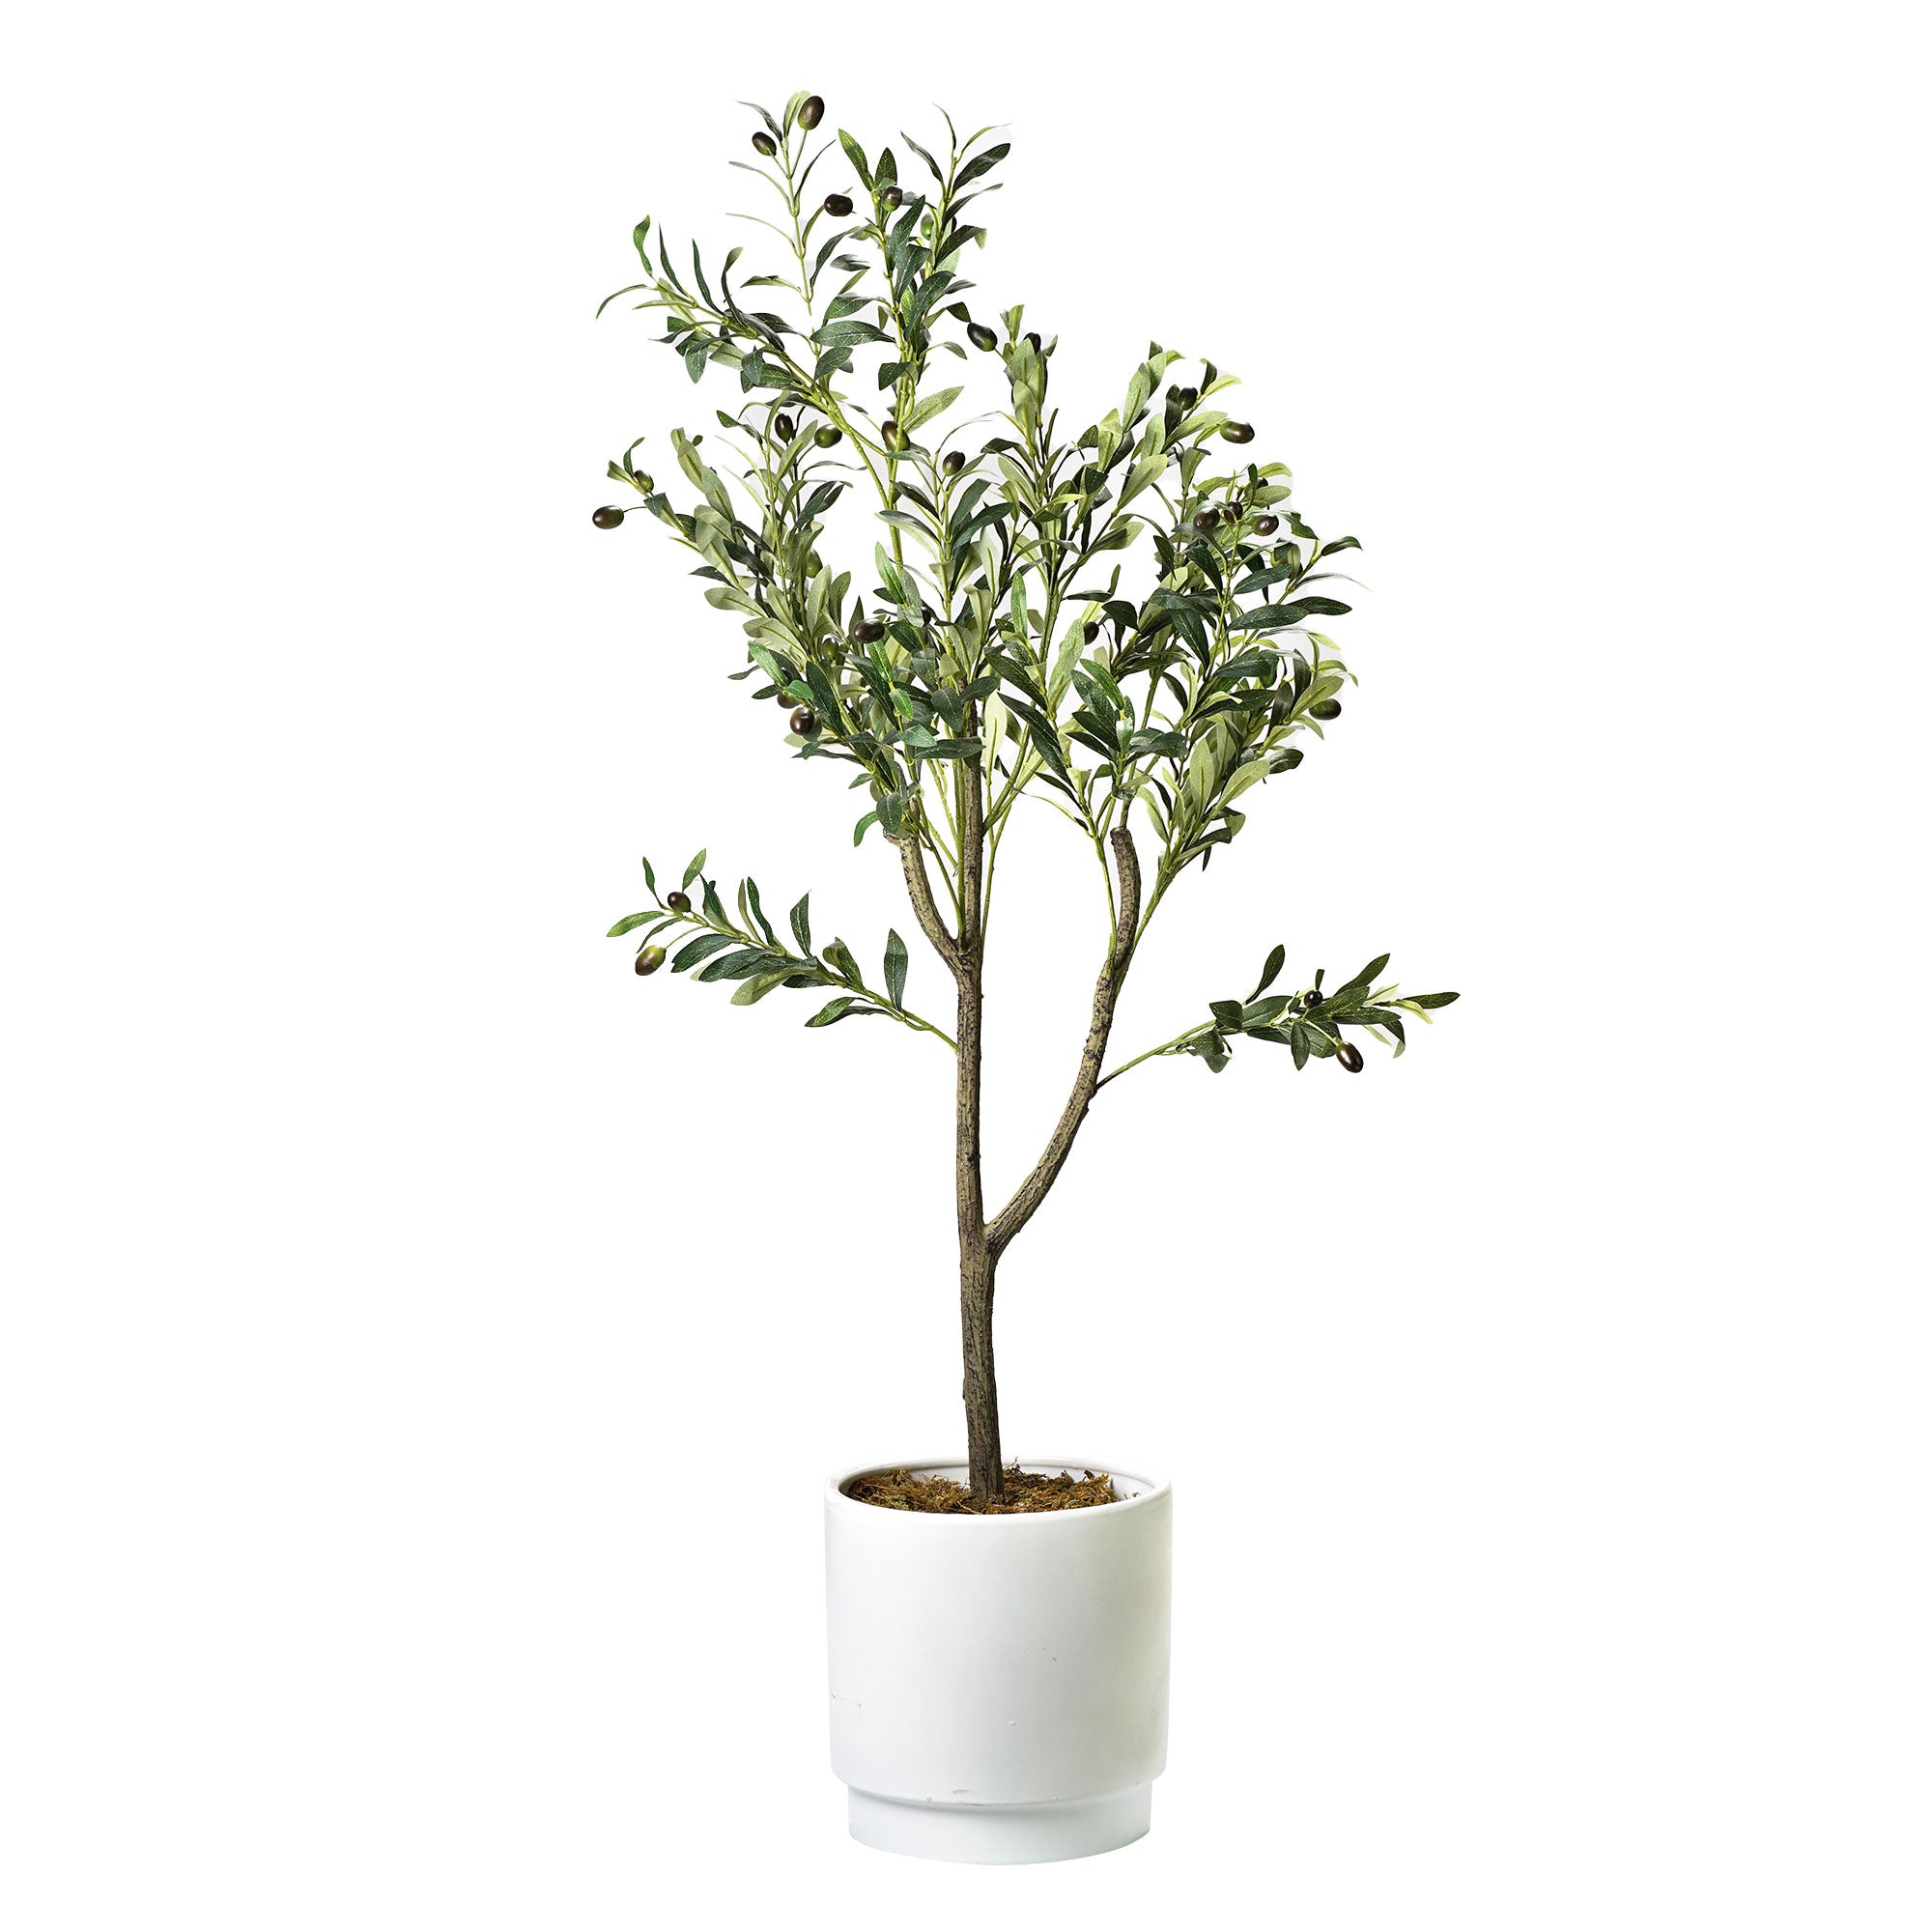 Artificial Olive Tree in White Ceramic Pot with Pedestal - 48